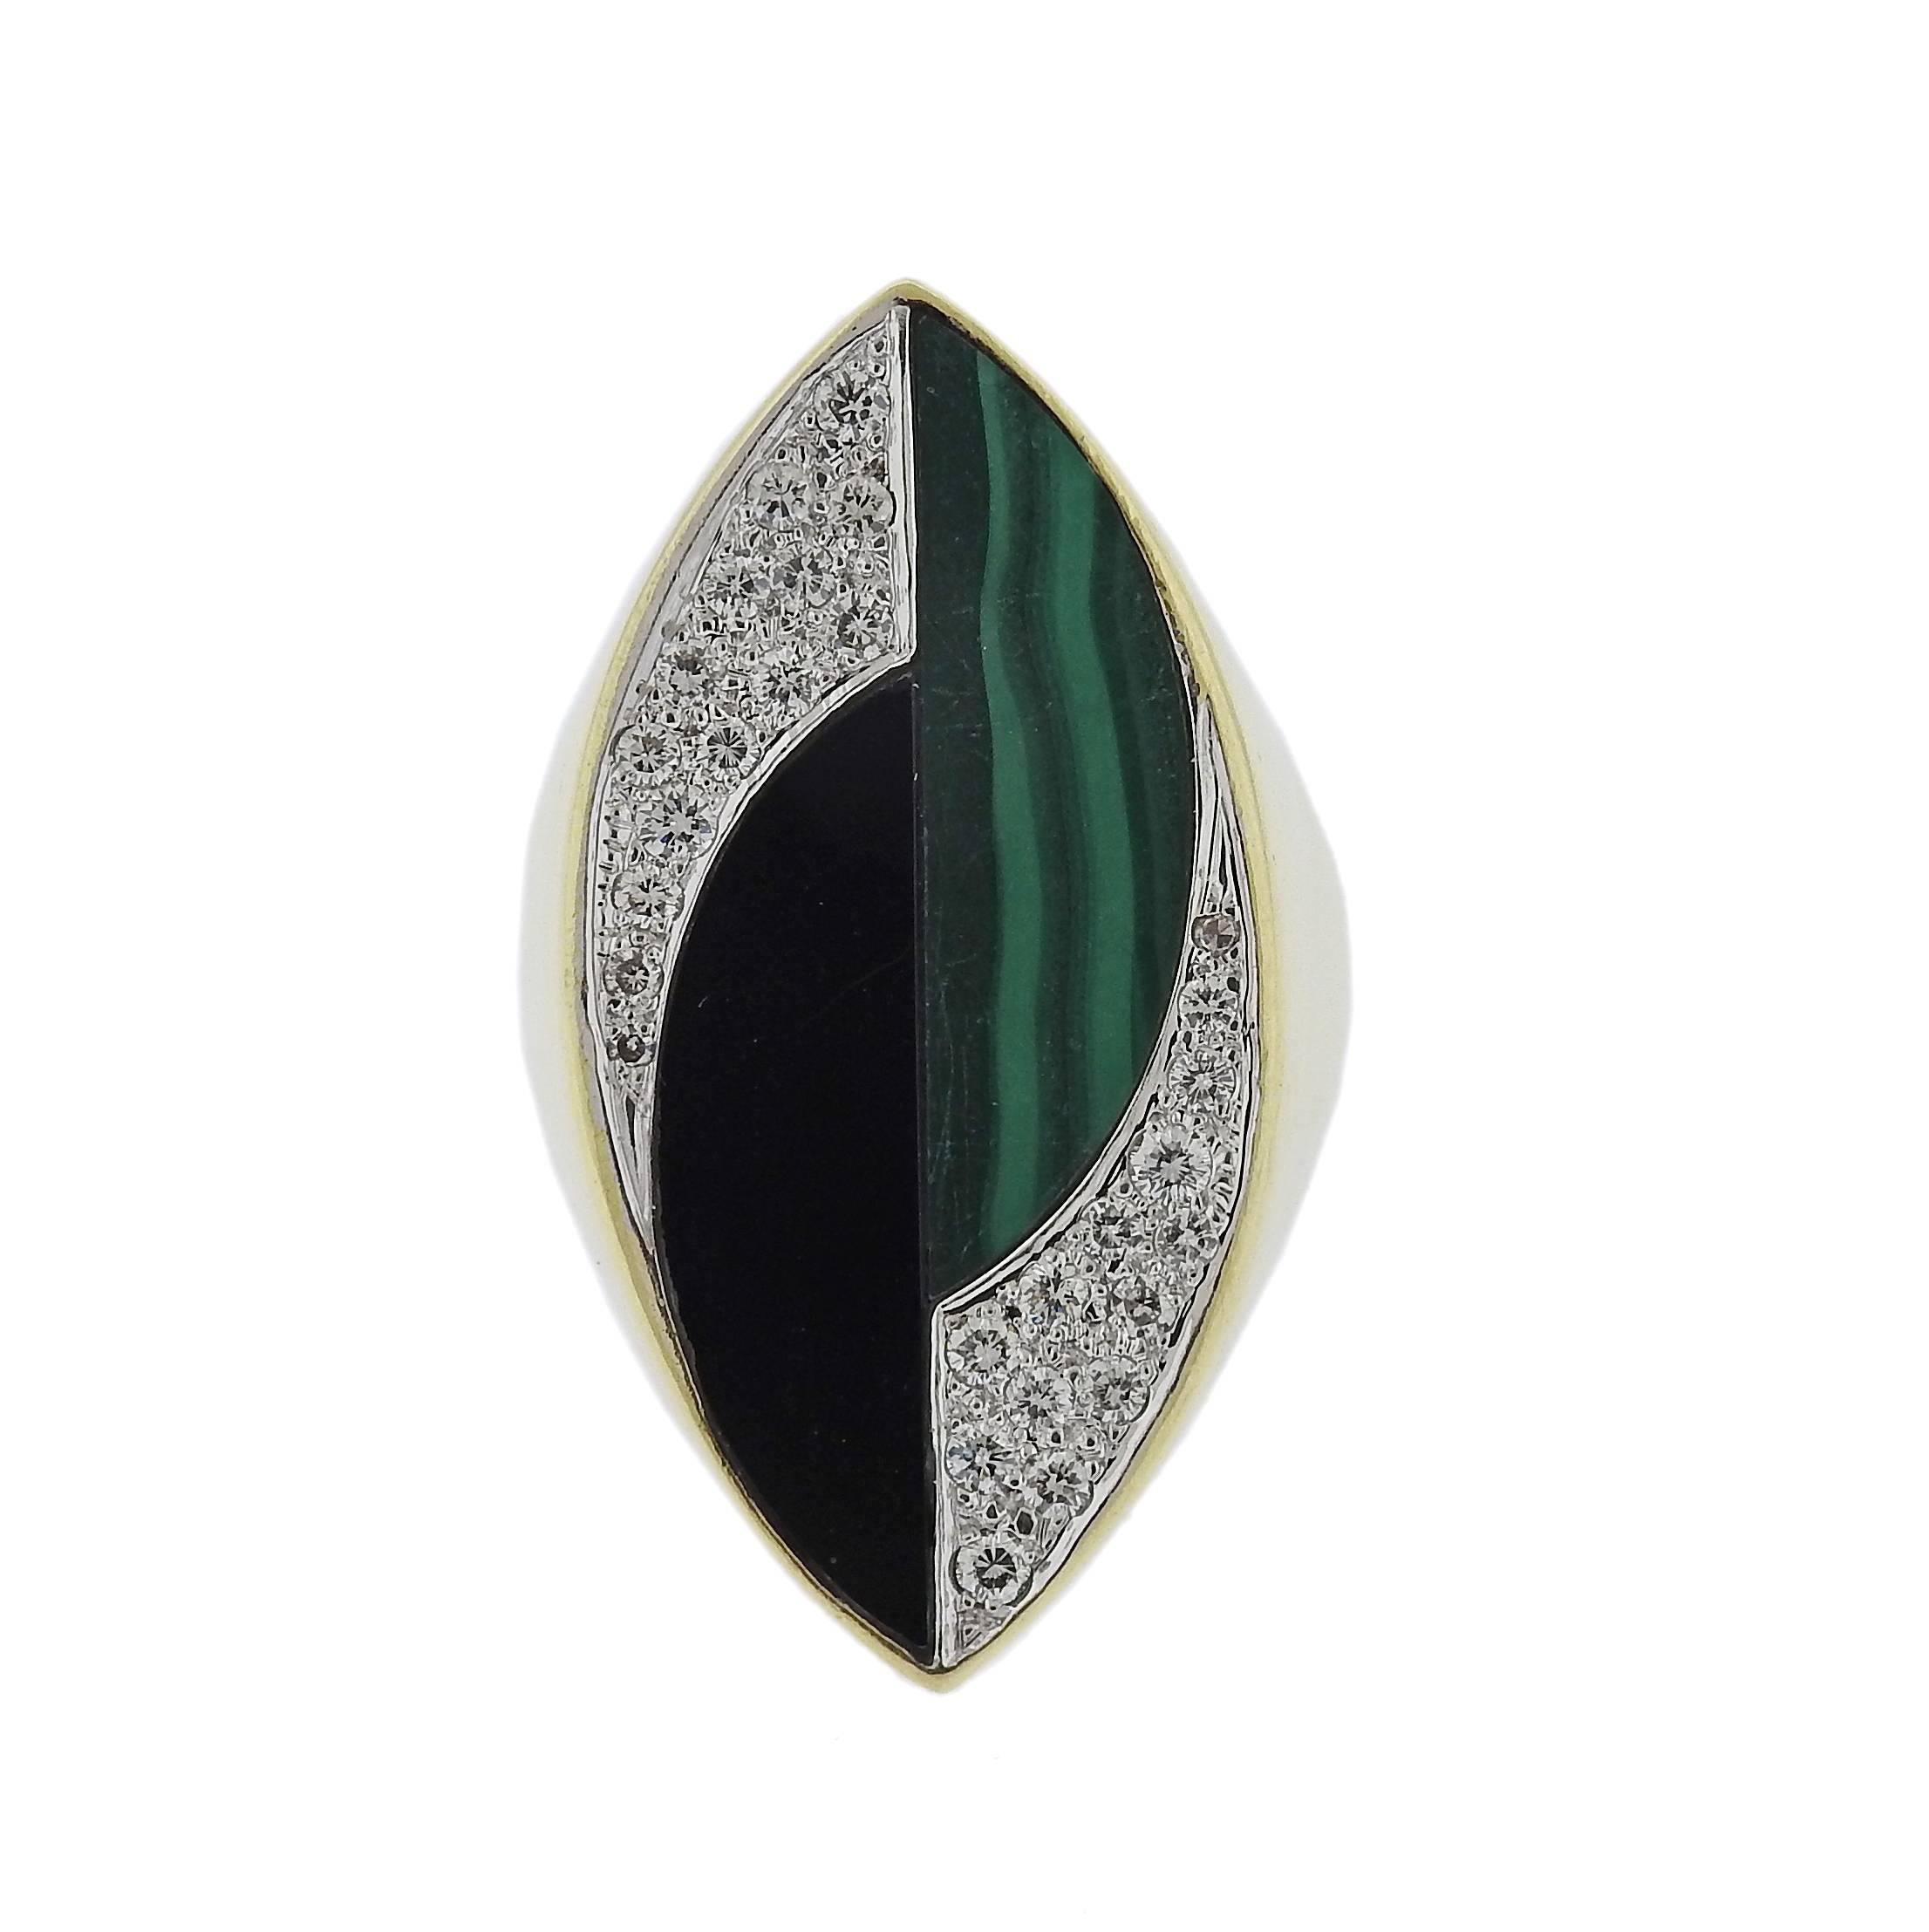 18k gold ring, crafted by La Triomphe, decorated with approximately 0.55ctw in diamonds, onyx and malachite. Ring size - 7, ring top is 35mm x 17mm, weight - 17.4 grams. Marked: 18kt, La Triomphe. 